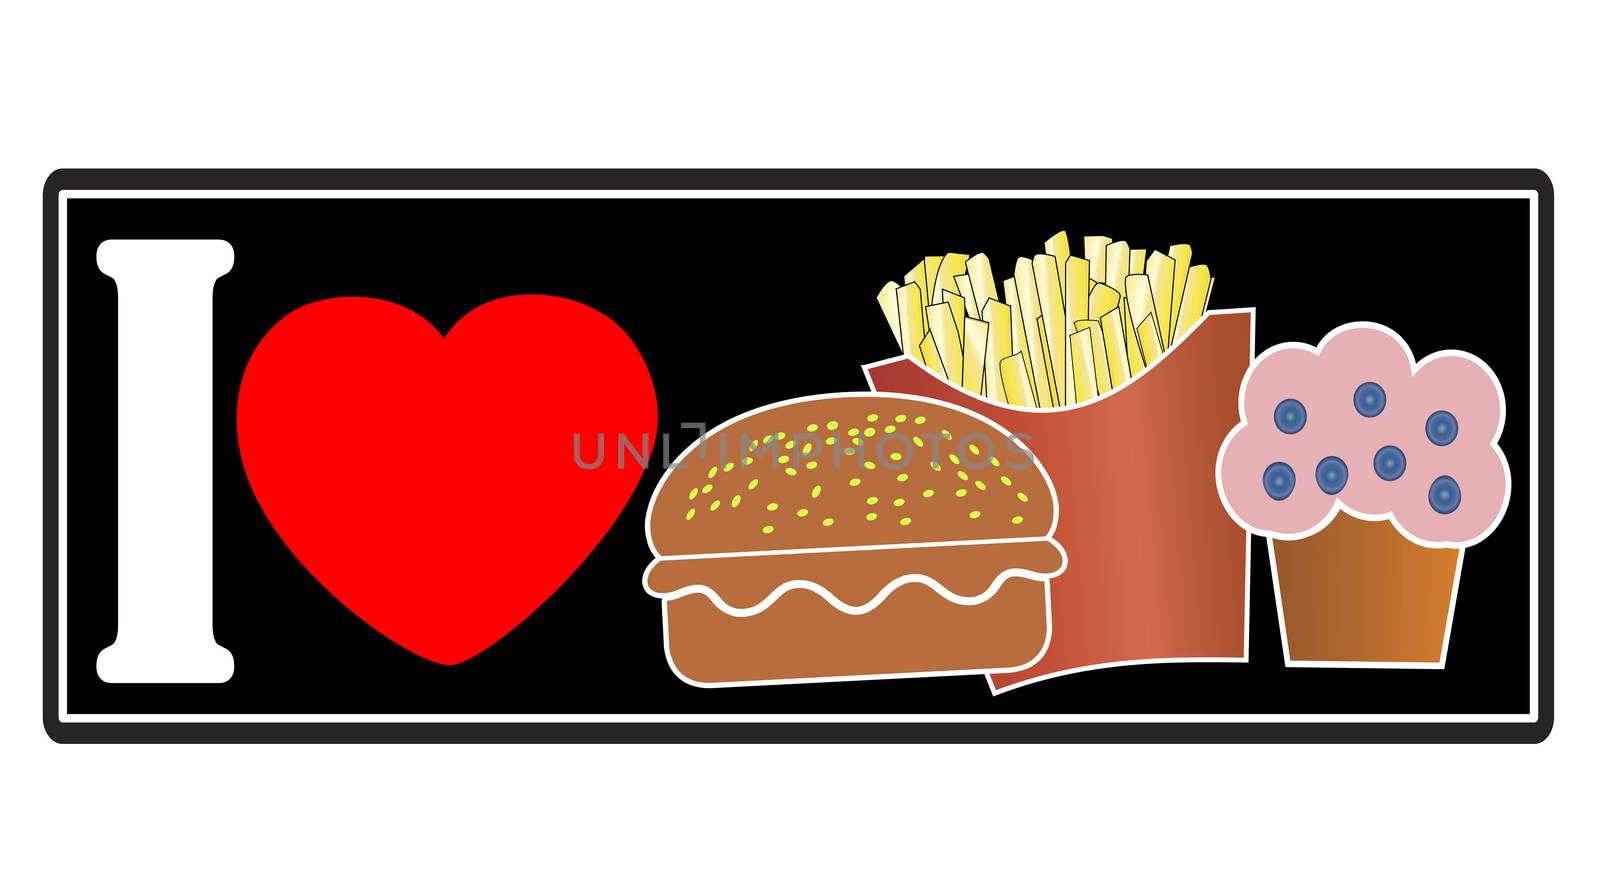 Concept sign for the preference of unhealthy eating habits